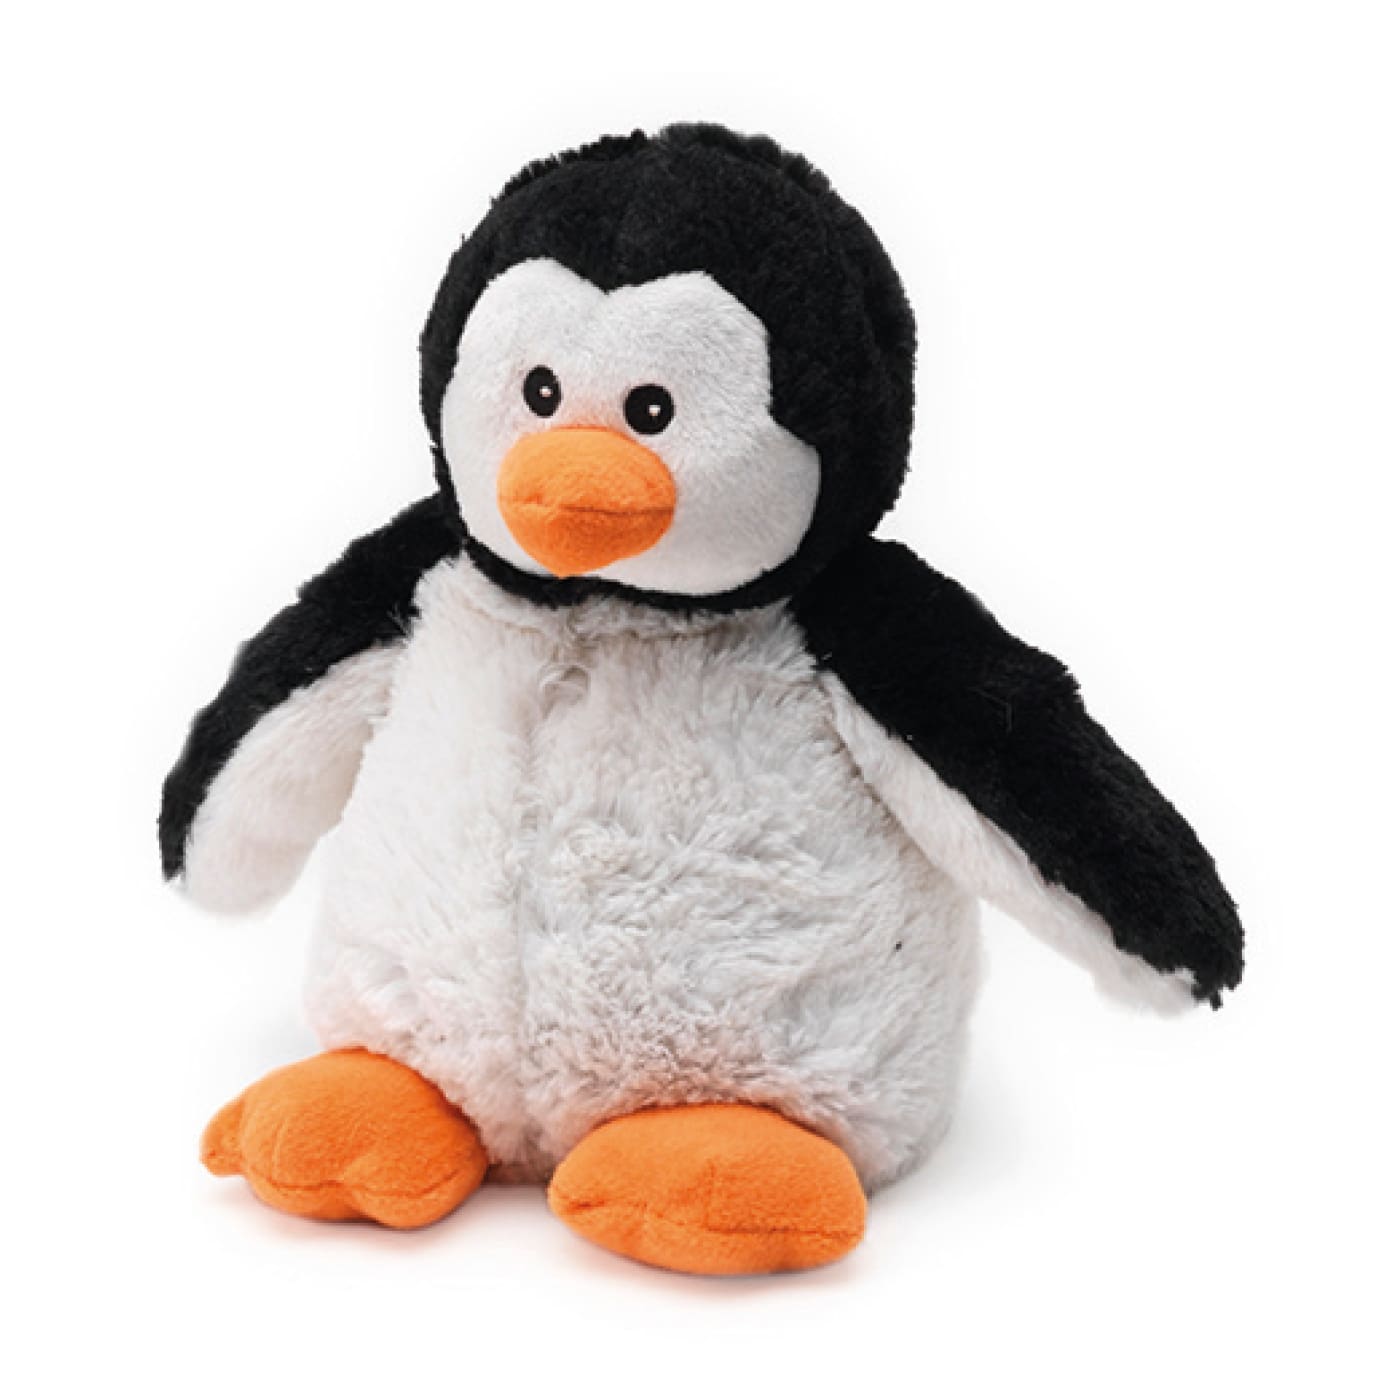 Warmies Cozy Plush - Penguin - Penguin - HEALTH & HOME SAFETY - THERMOMETERS/MEDICINAL